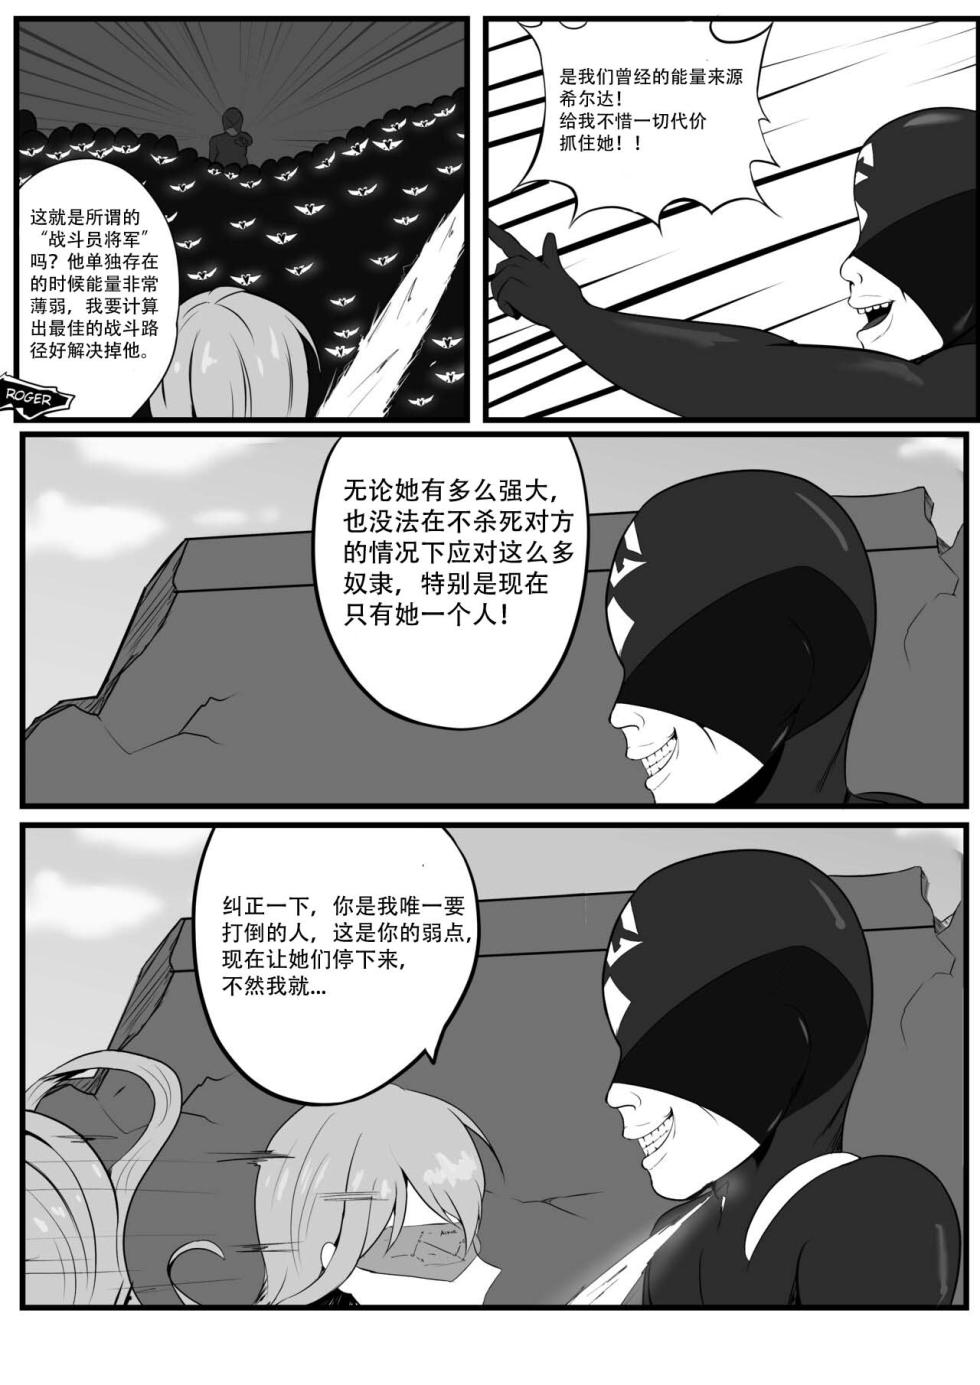 [Aynes] The Degradation of Angels [心海汉化组] - Page 3